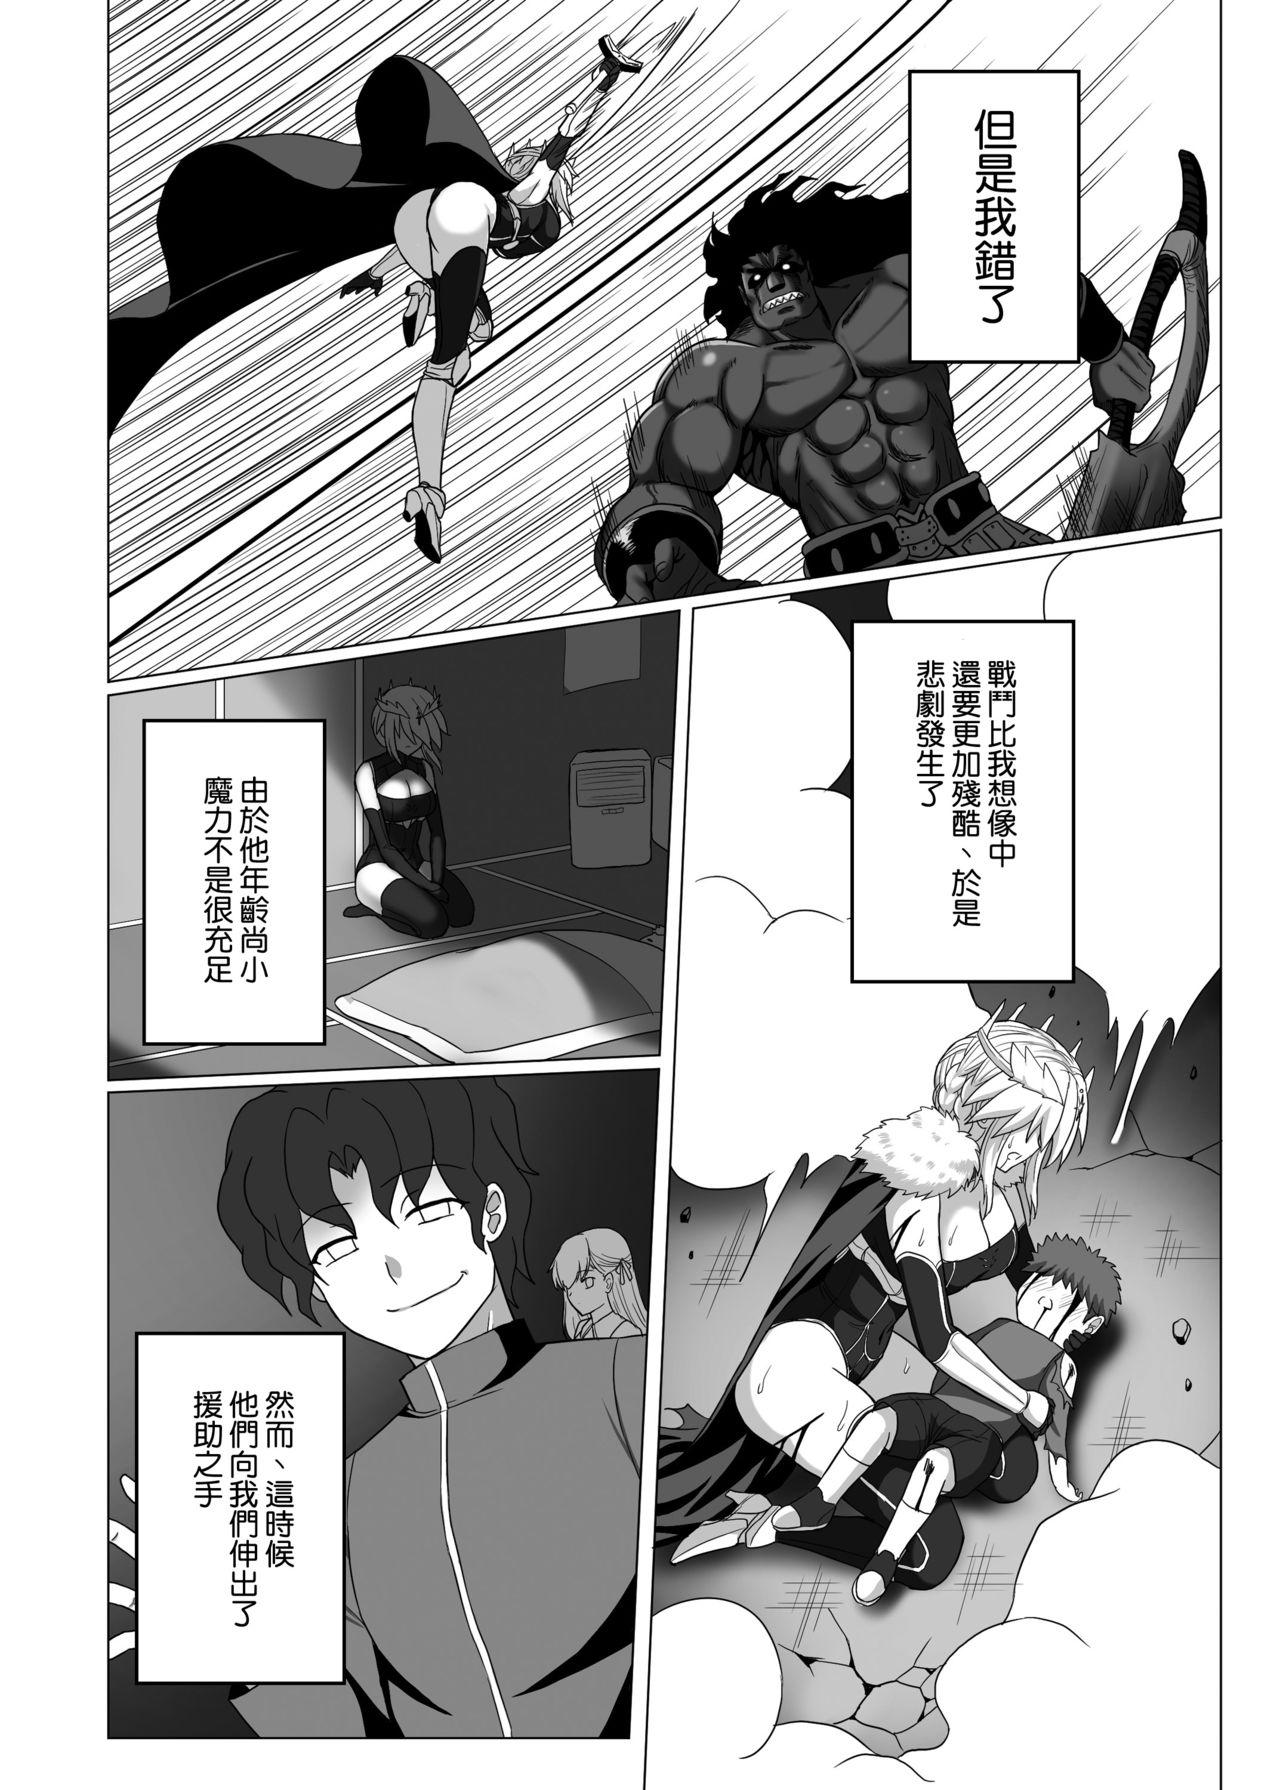 Submissive Fate/NTR - Fate grand order Sucking Dicks - Page 6